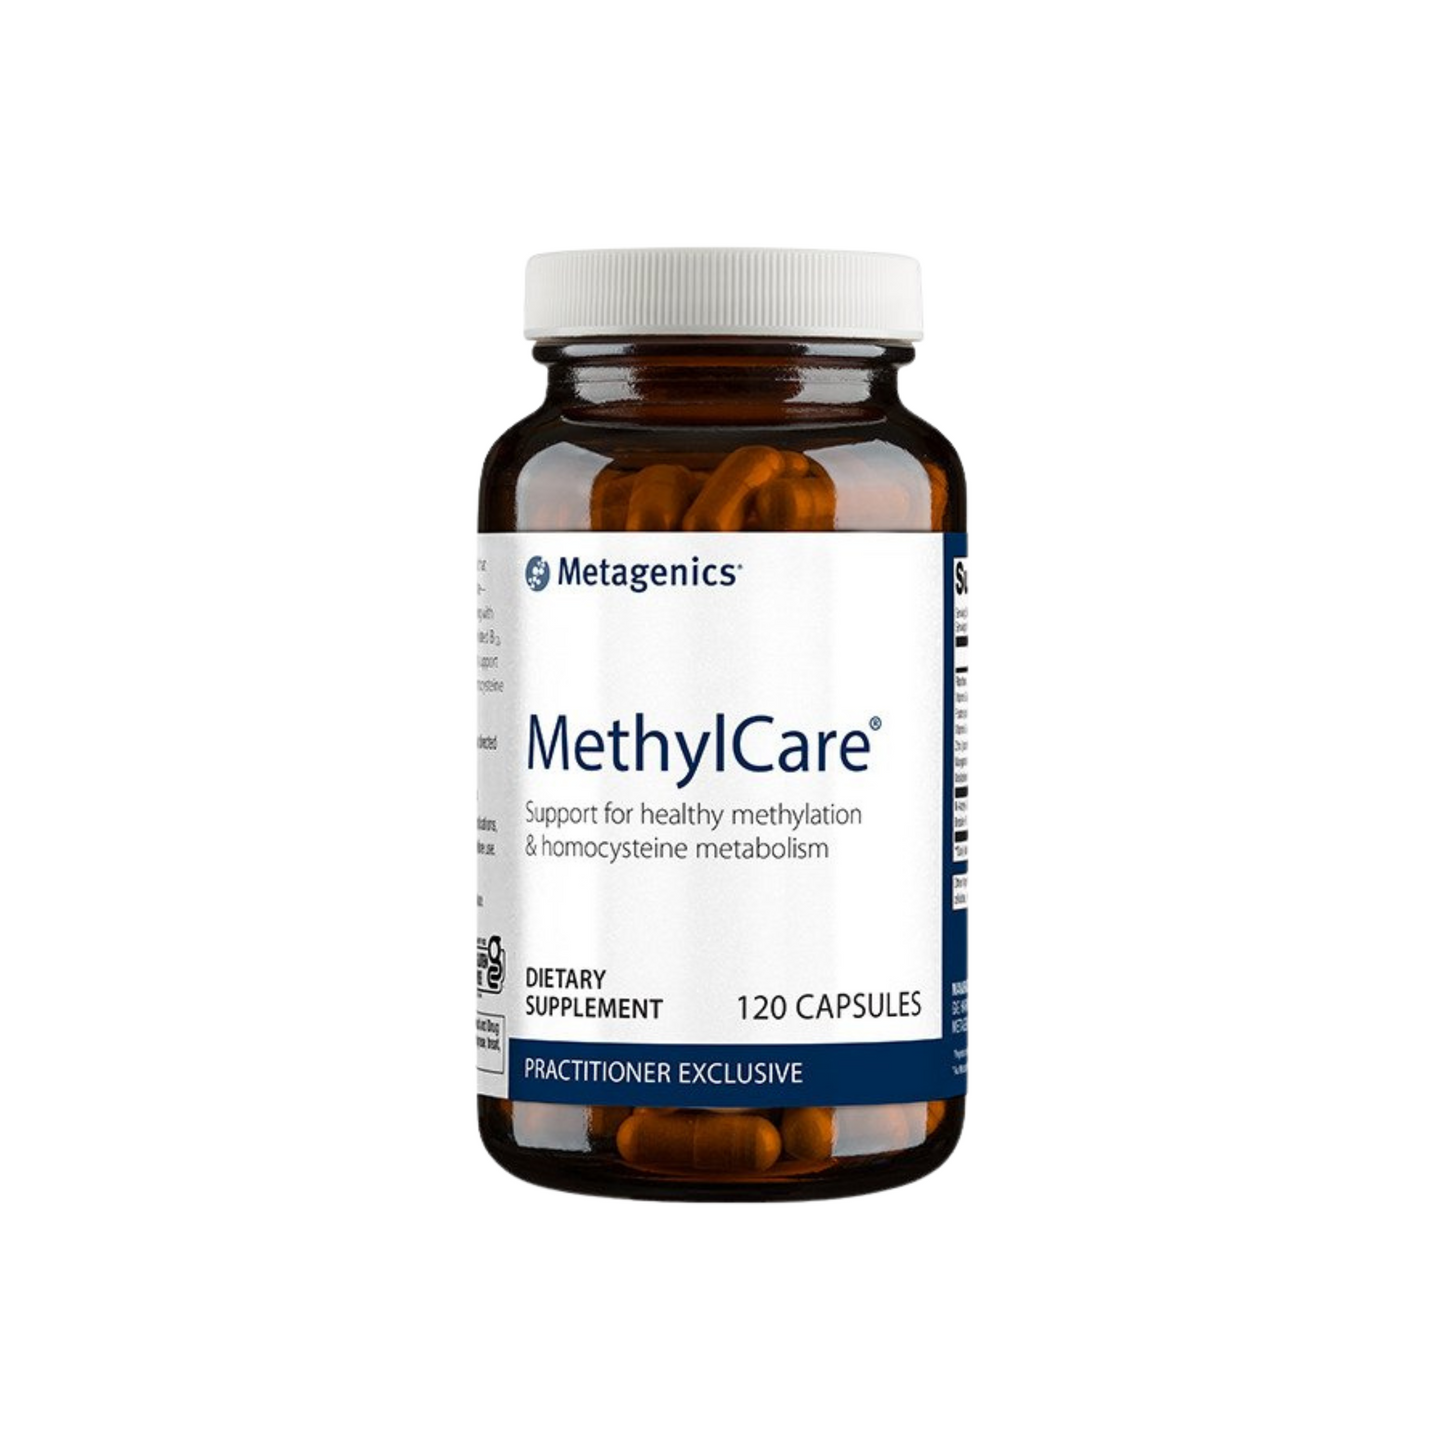 MethylCare